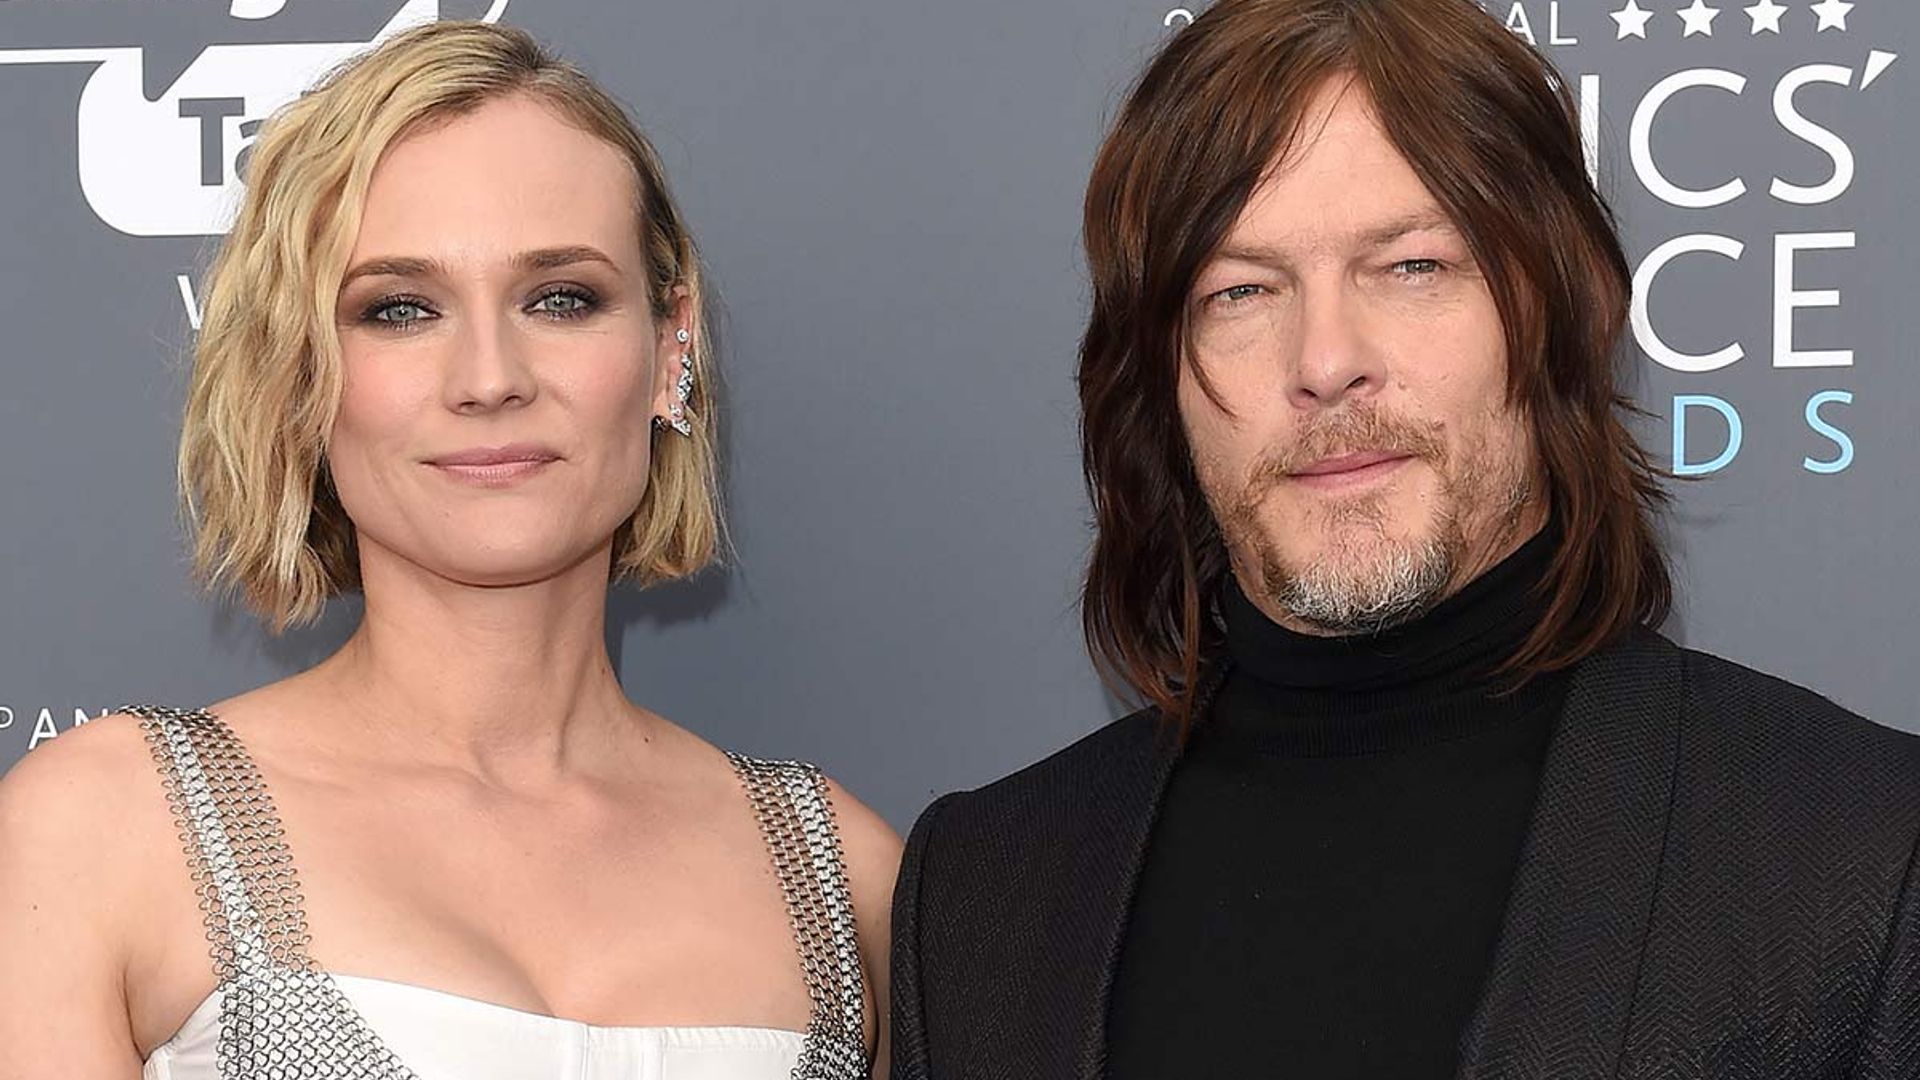 Norman Reedus' rare family photo with Diane Kruger and daughter is adorable